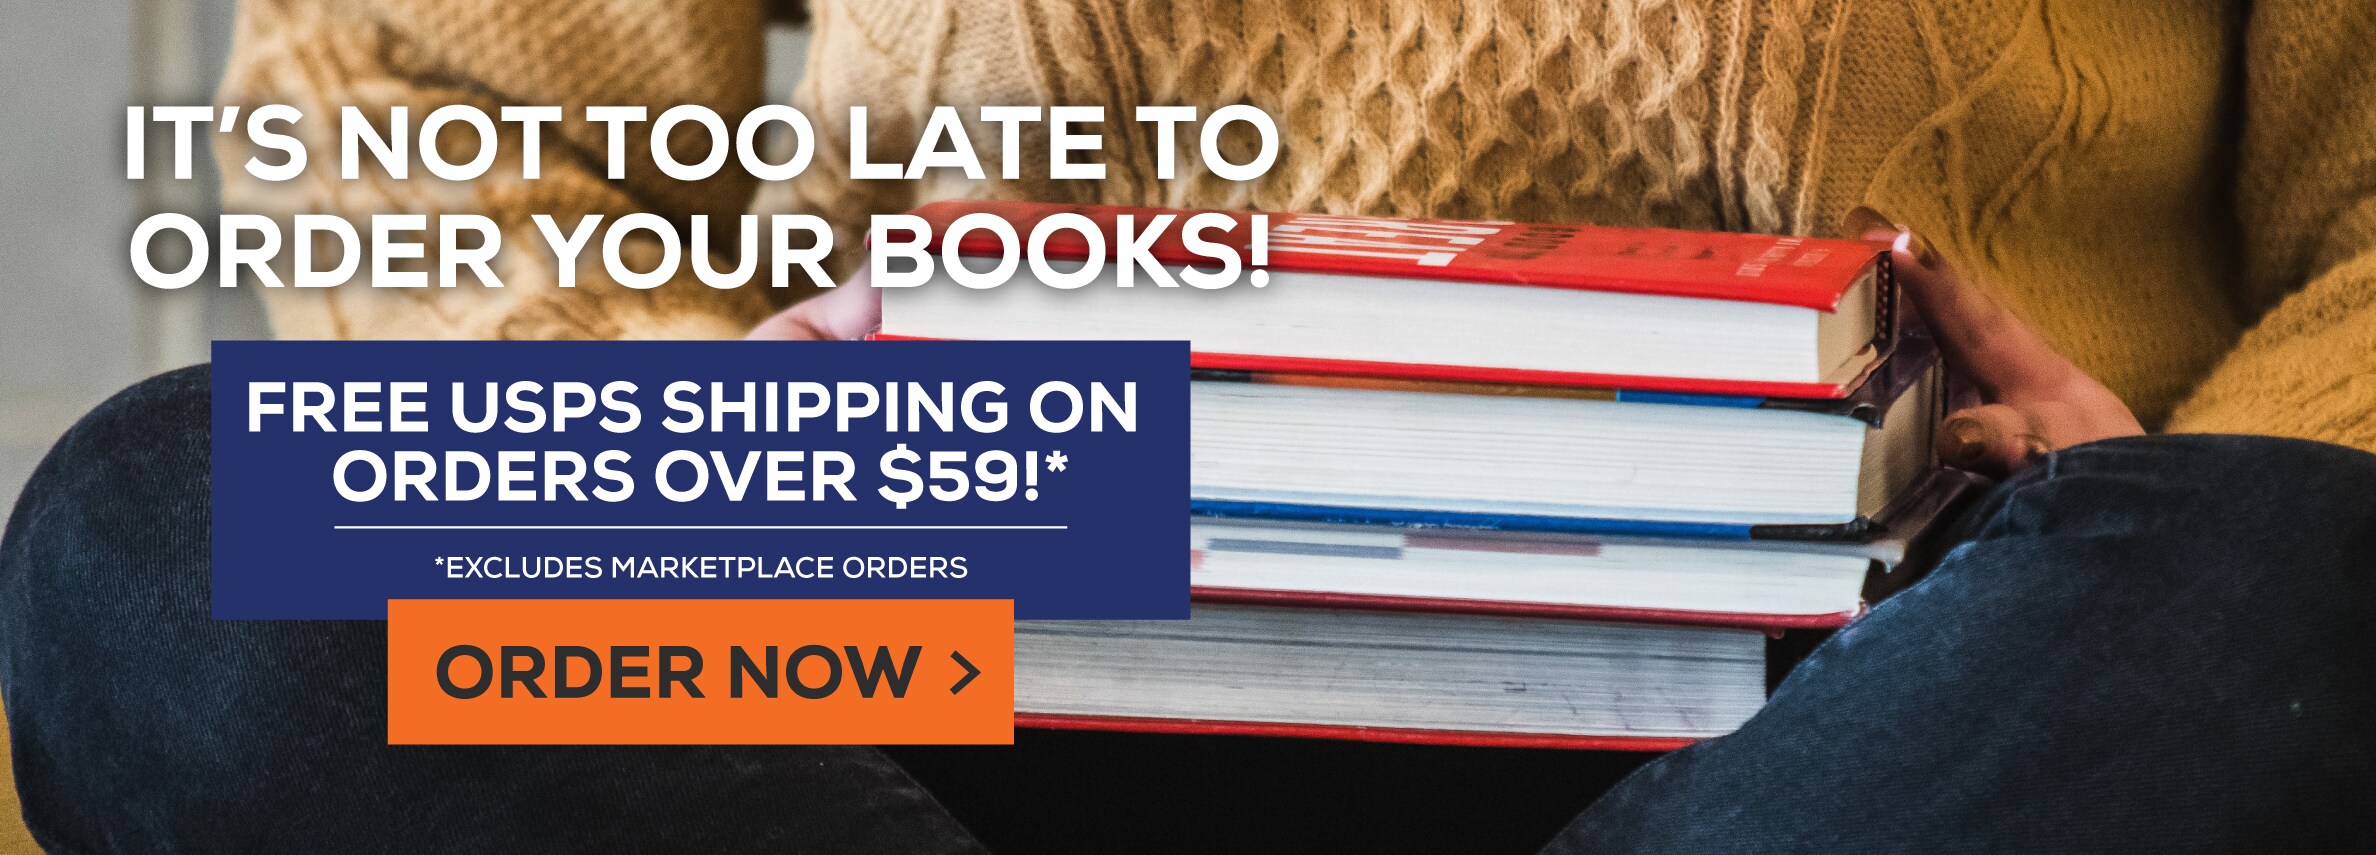 ItÃ¢â‚¬â„¢s not too late to order your books! Free USPS shipping on orders over $59!* Excludes marketplace purchases. Order Now.